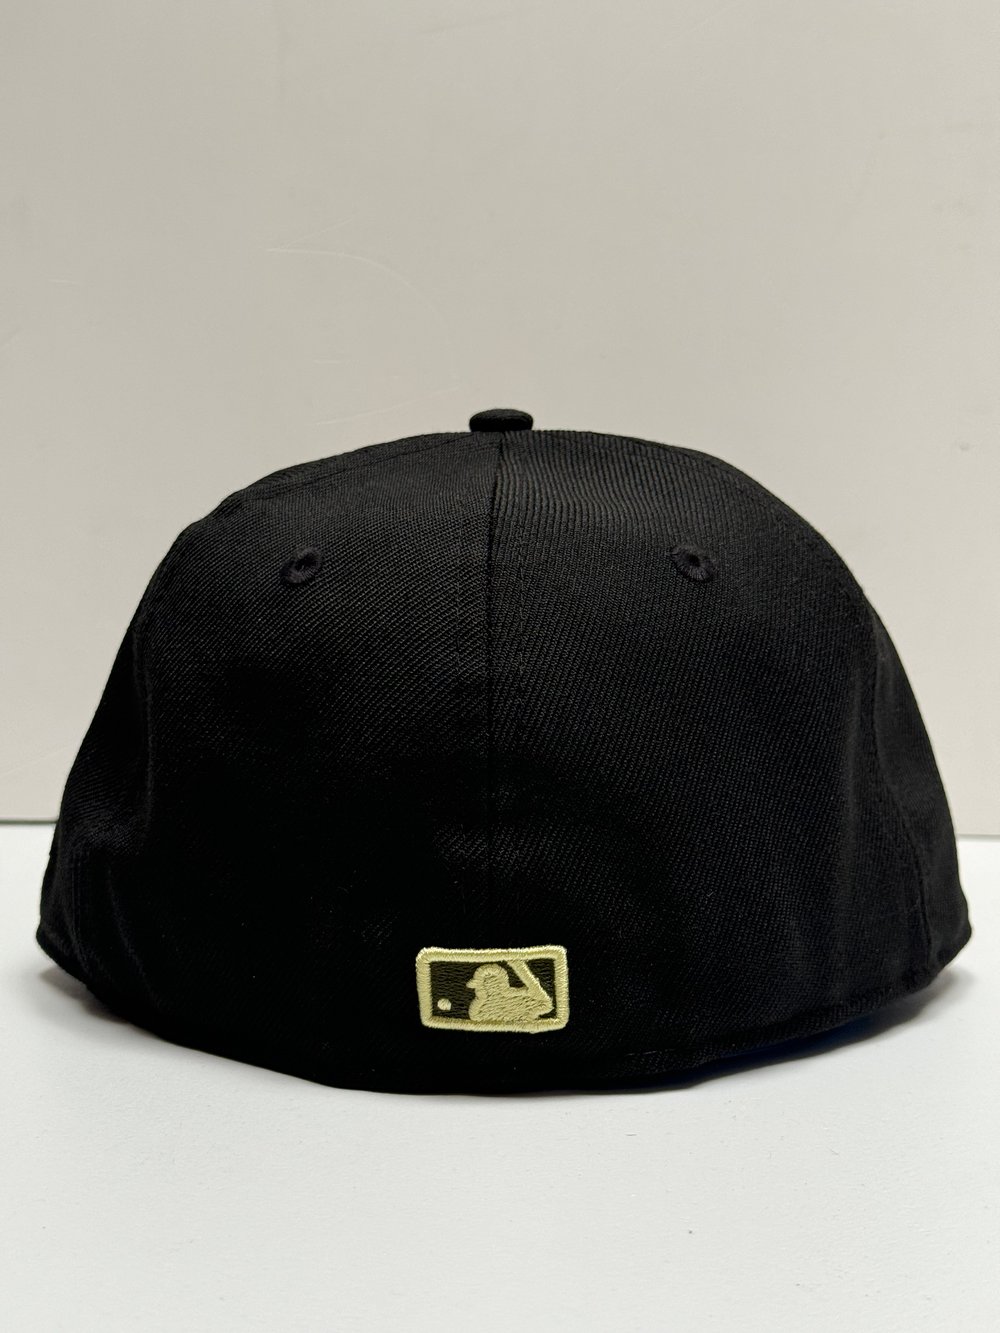 New Era SAN DIEGO PADRES Camo camoflauge Black 59FIFTY FITTED HAT  Homie Gear